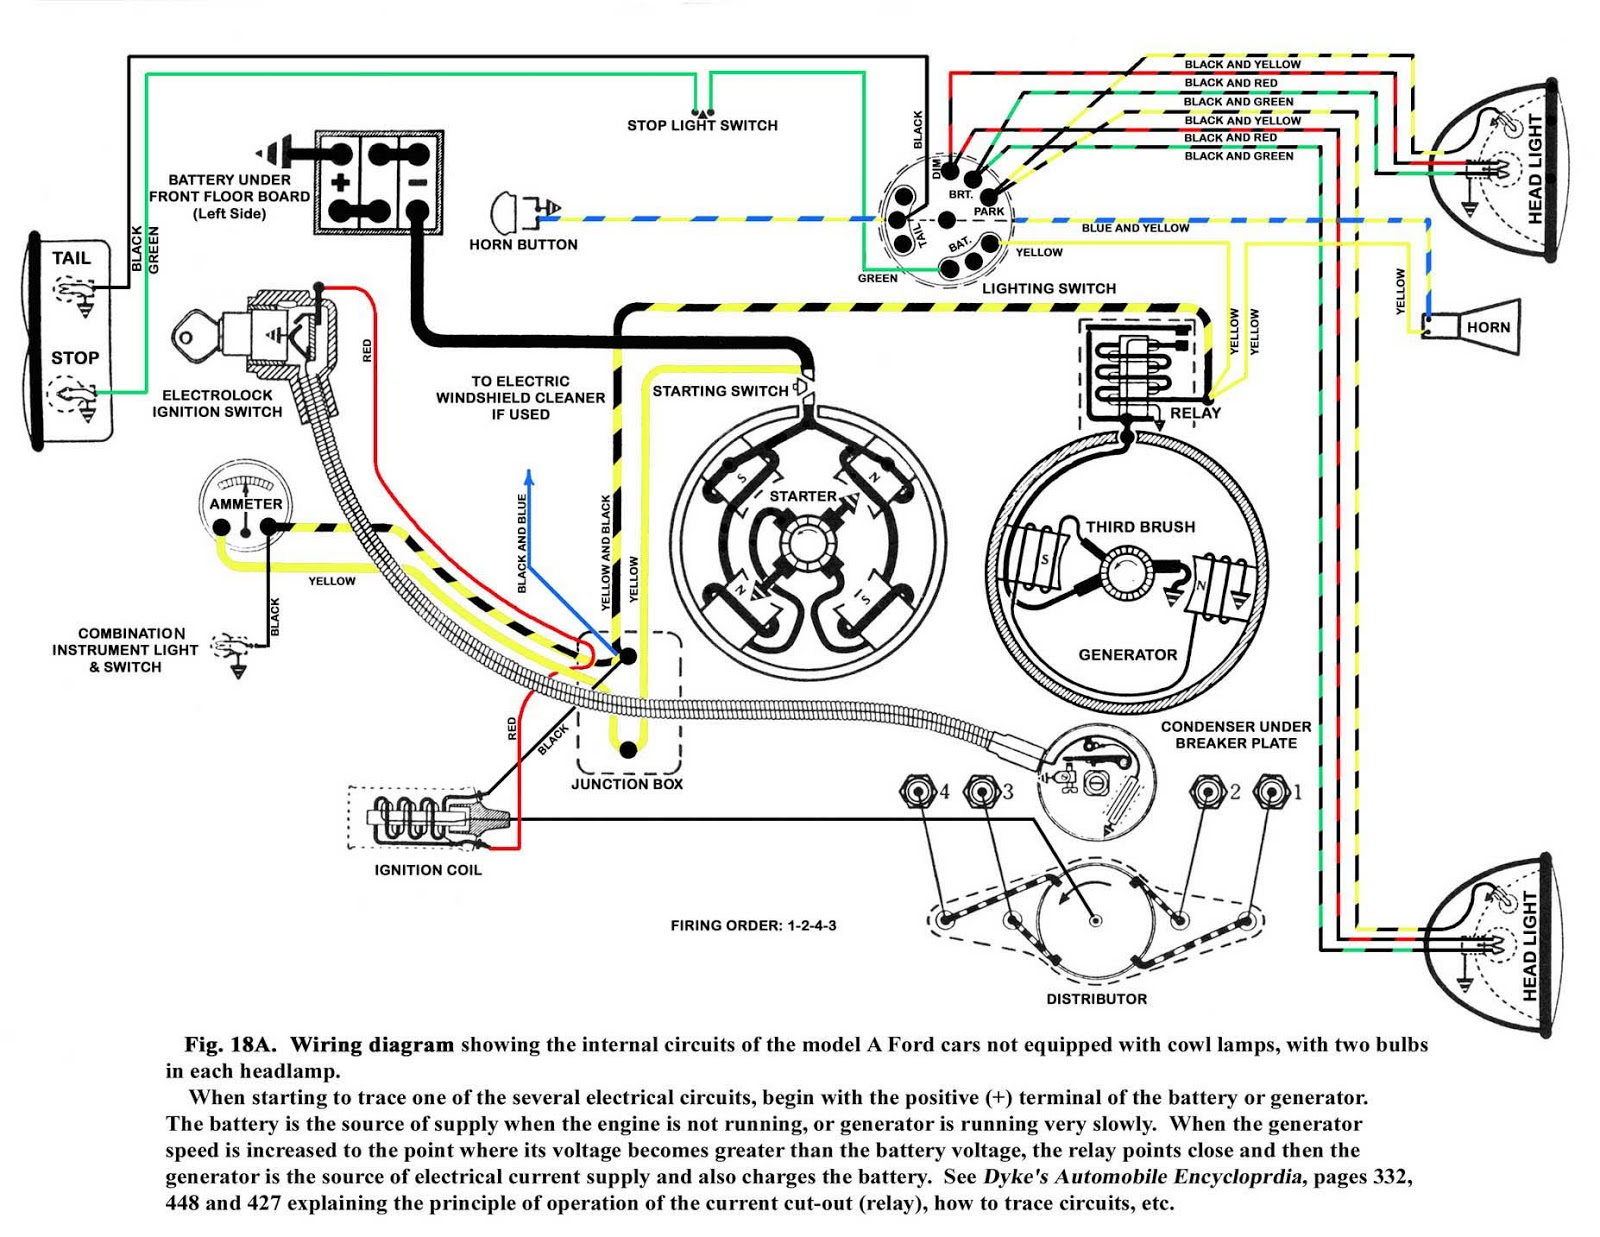 Diagram] The Model A Ford Henry And That Era Ignition